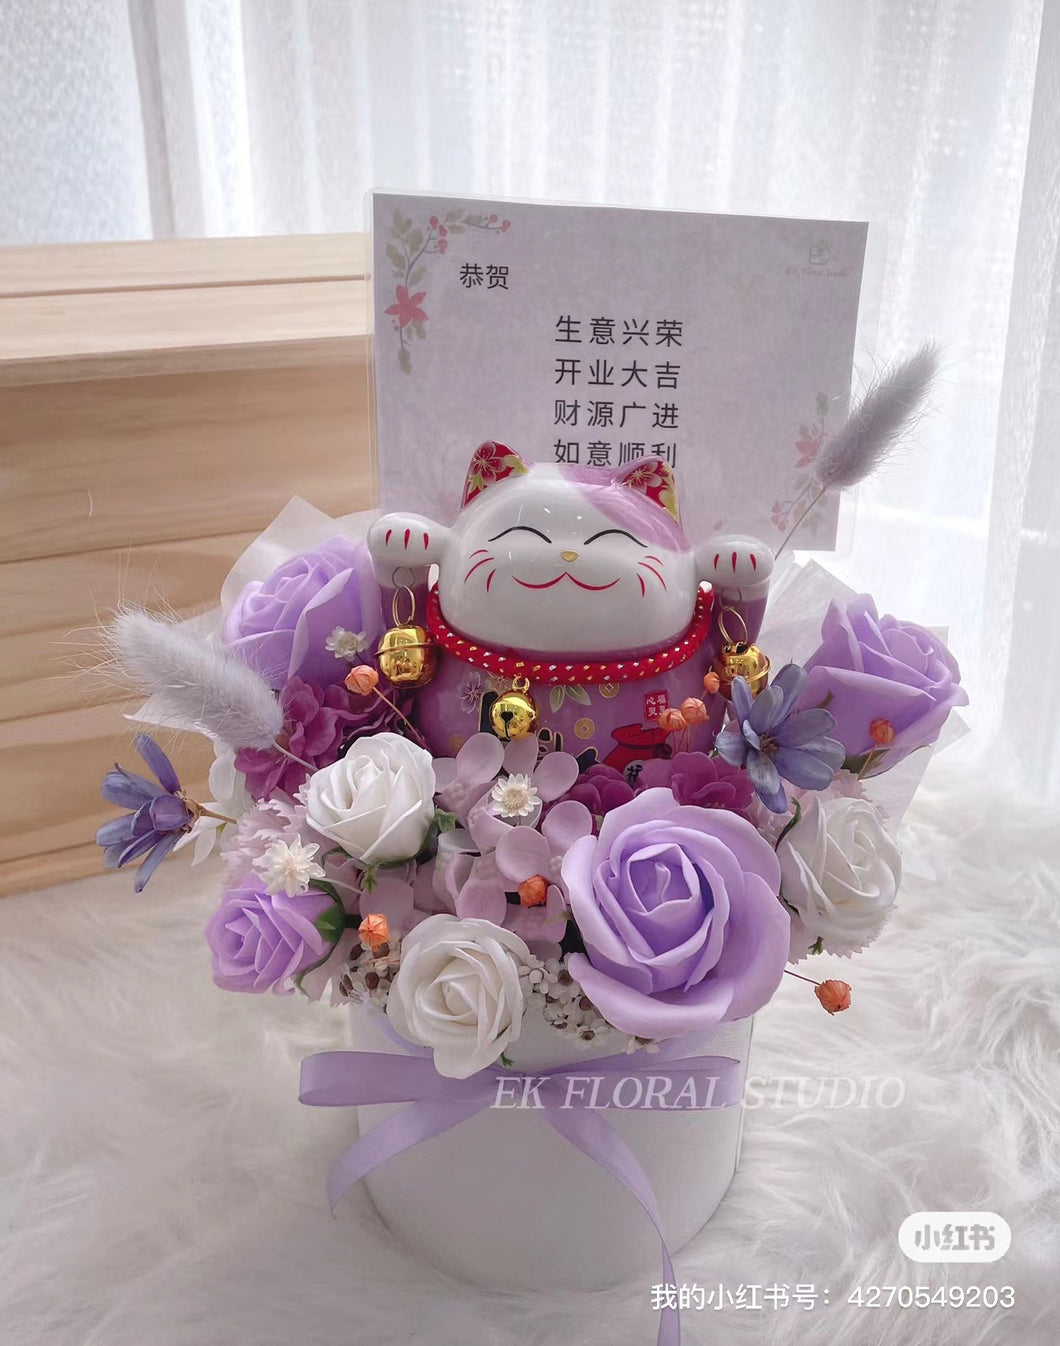 Prospered Soap Flower Bucket with Fortune Cat 福高照招财猫香皂开业花桶